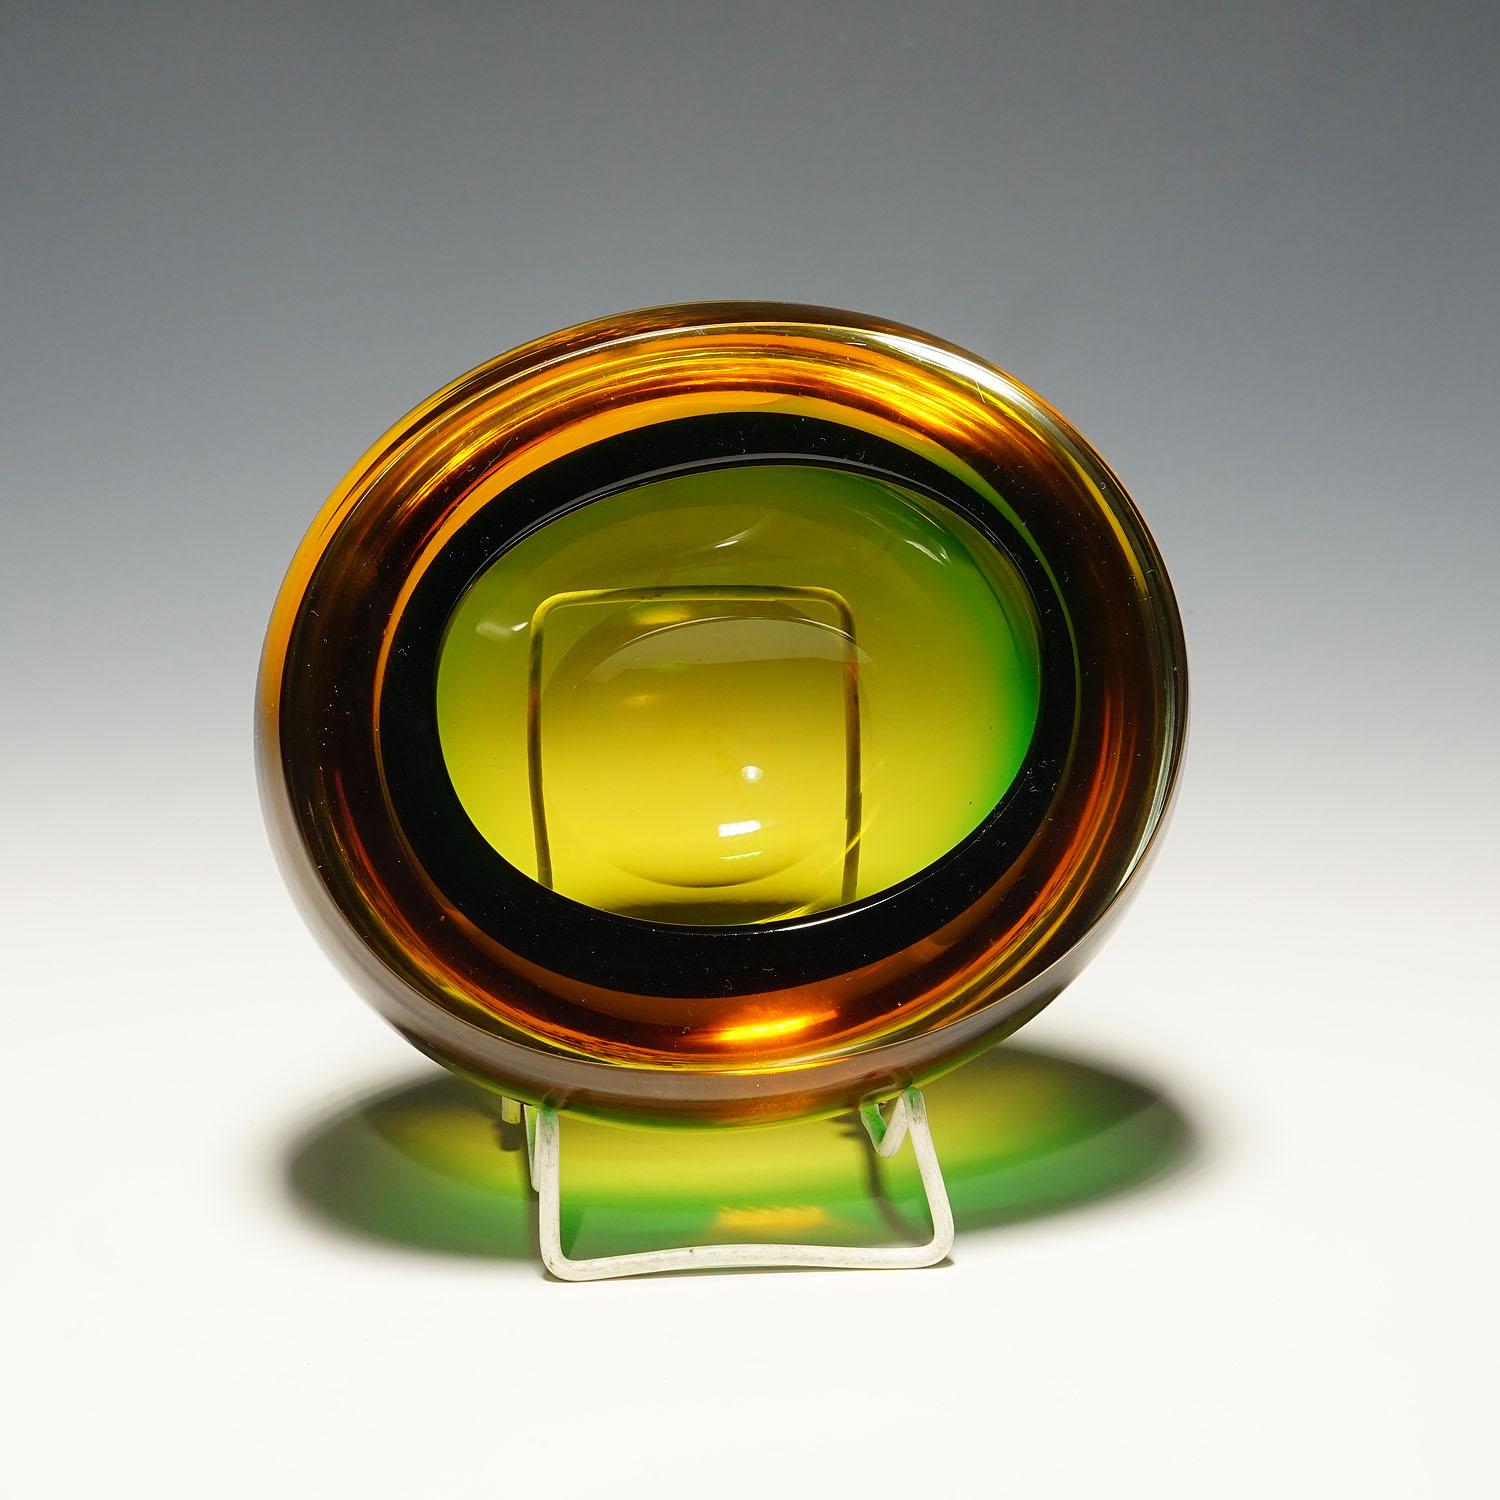 20th Century Midcentury Modern Murano Green and Amber Sommerso Art Glass Bowl 1960s For Sale